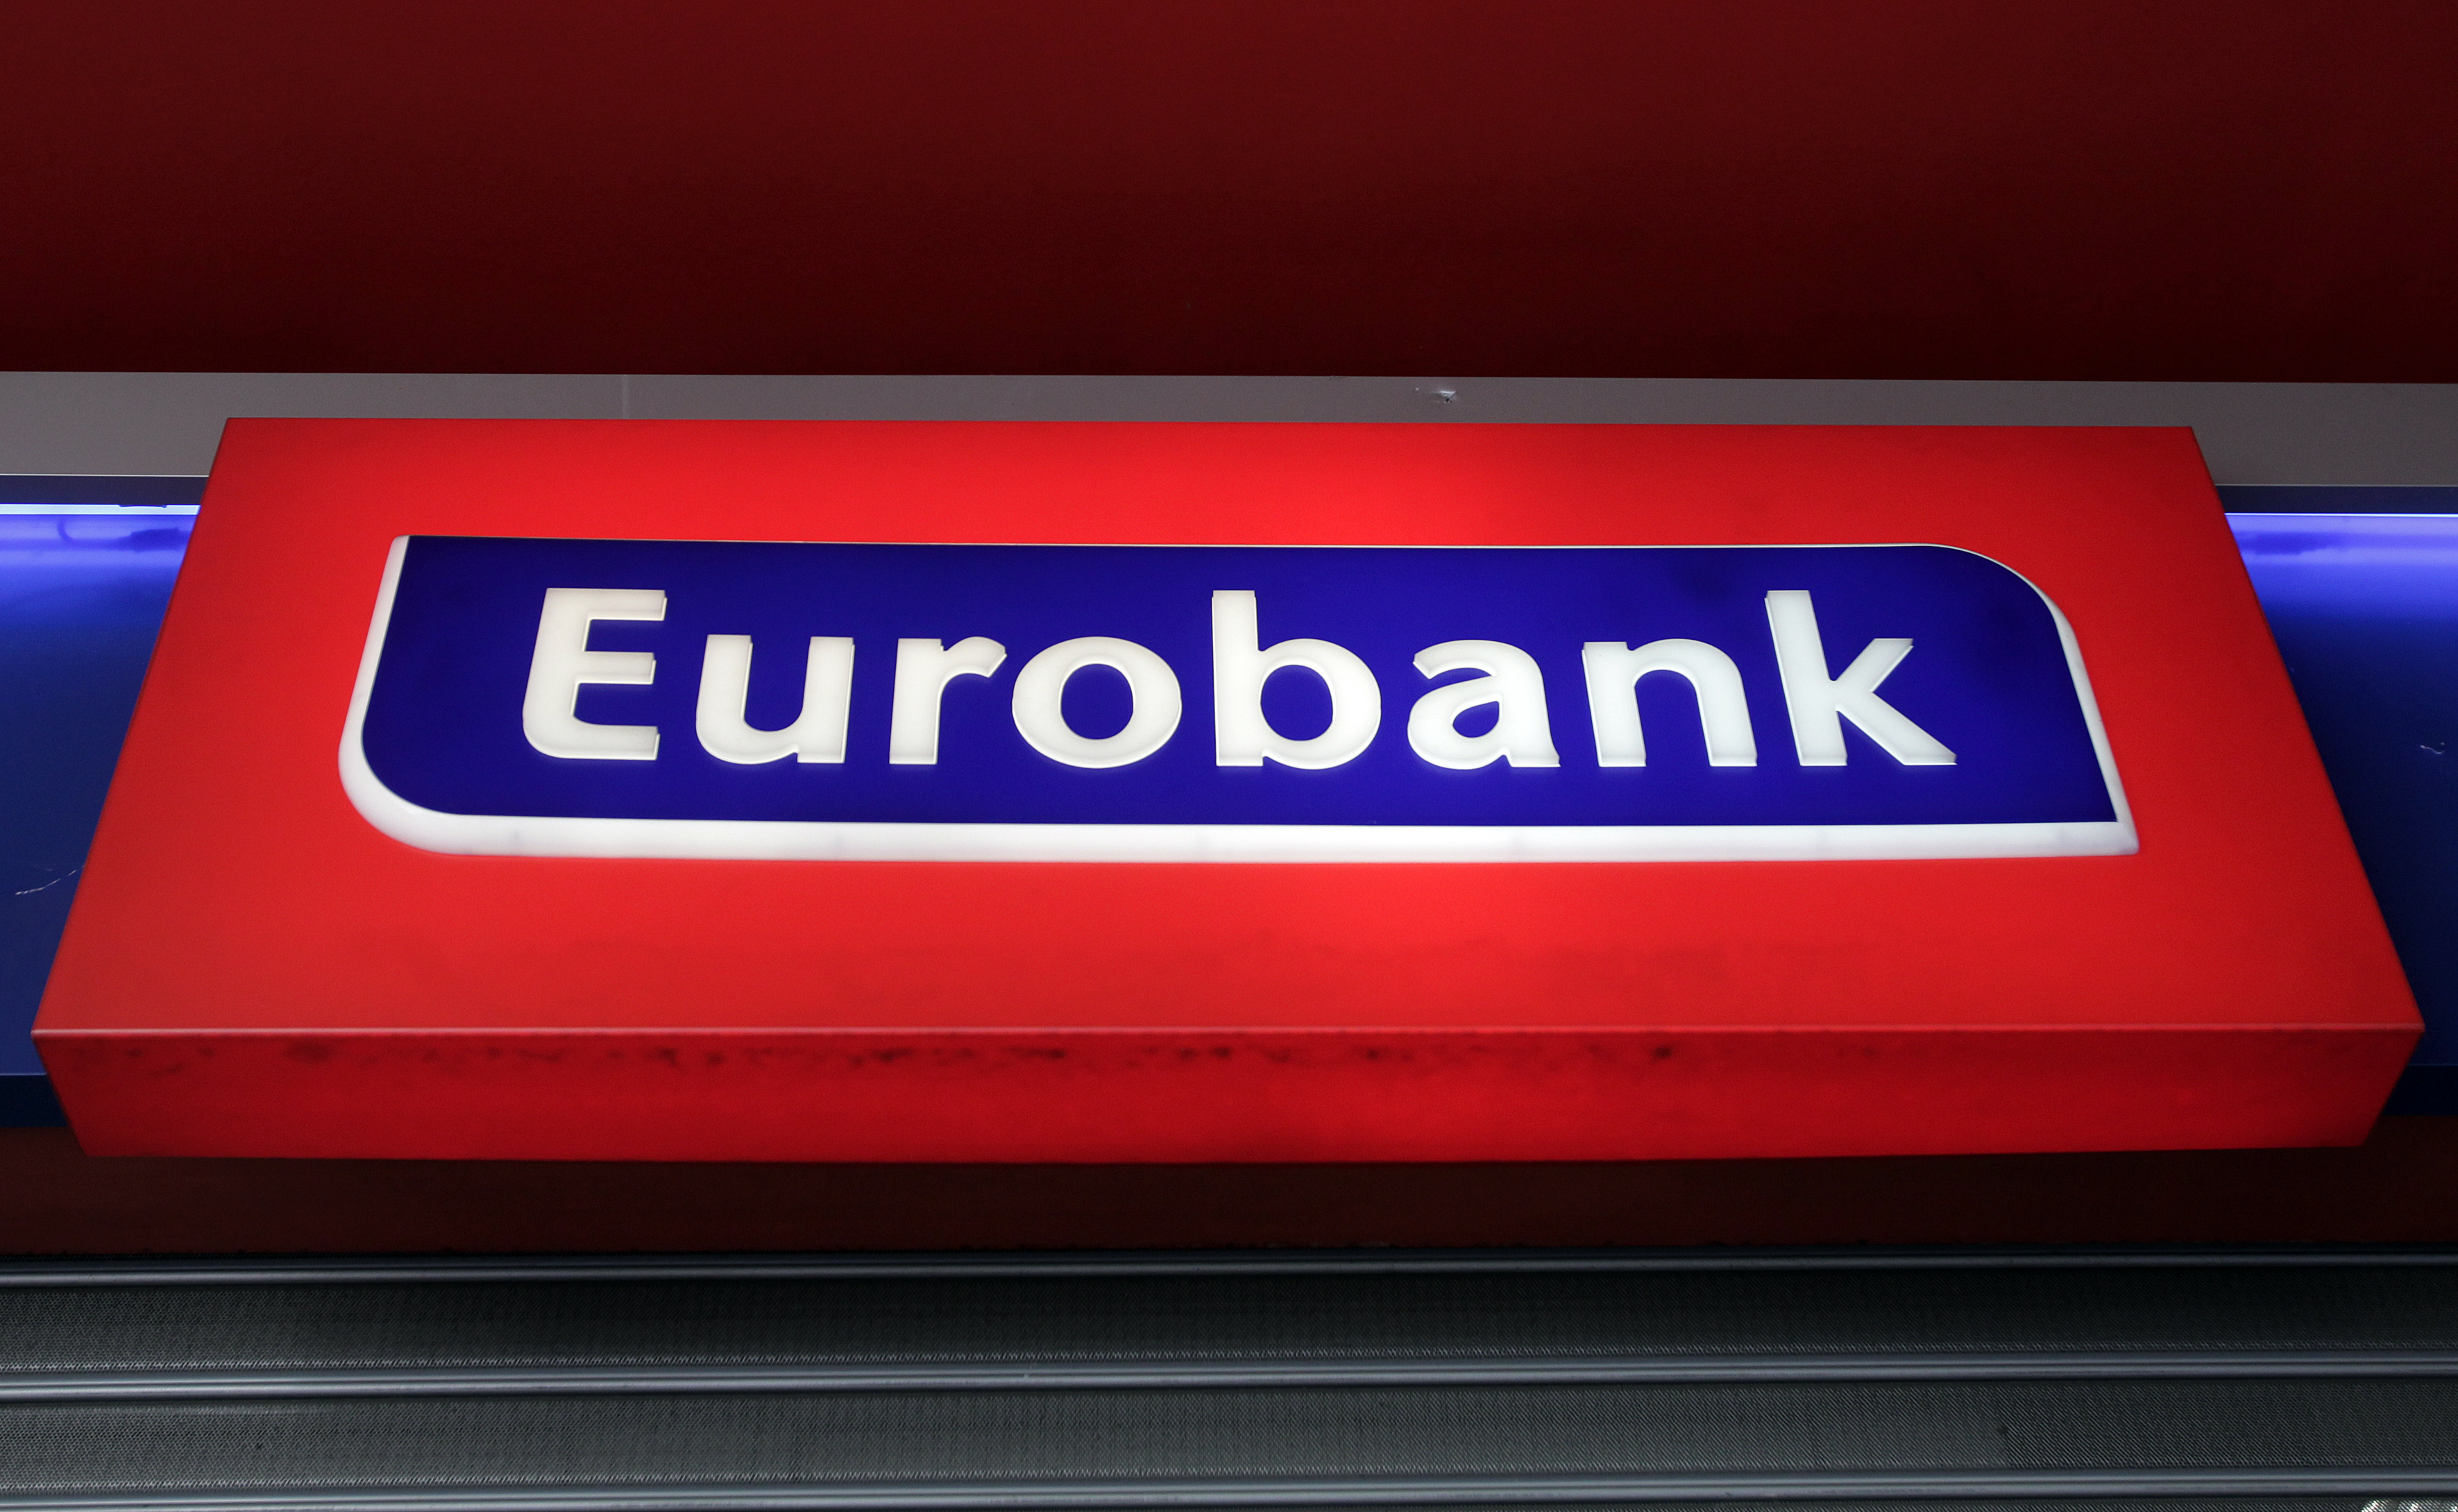 Clinton’s son-in-law interested in Eurobank